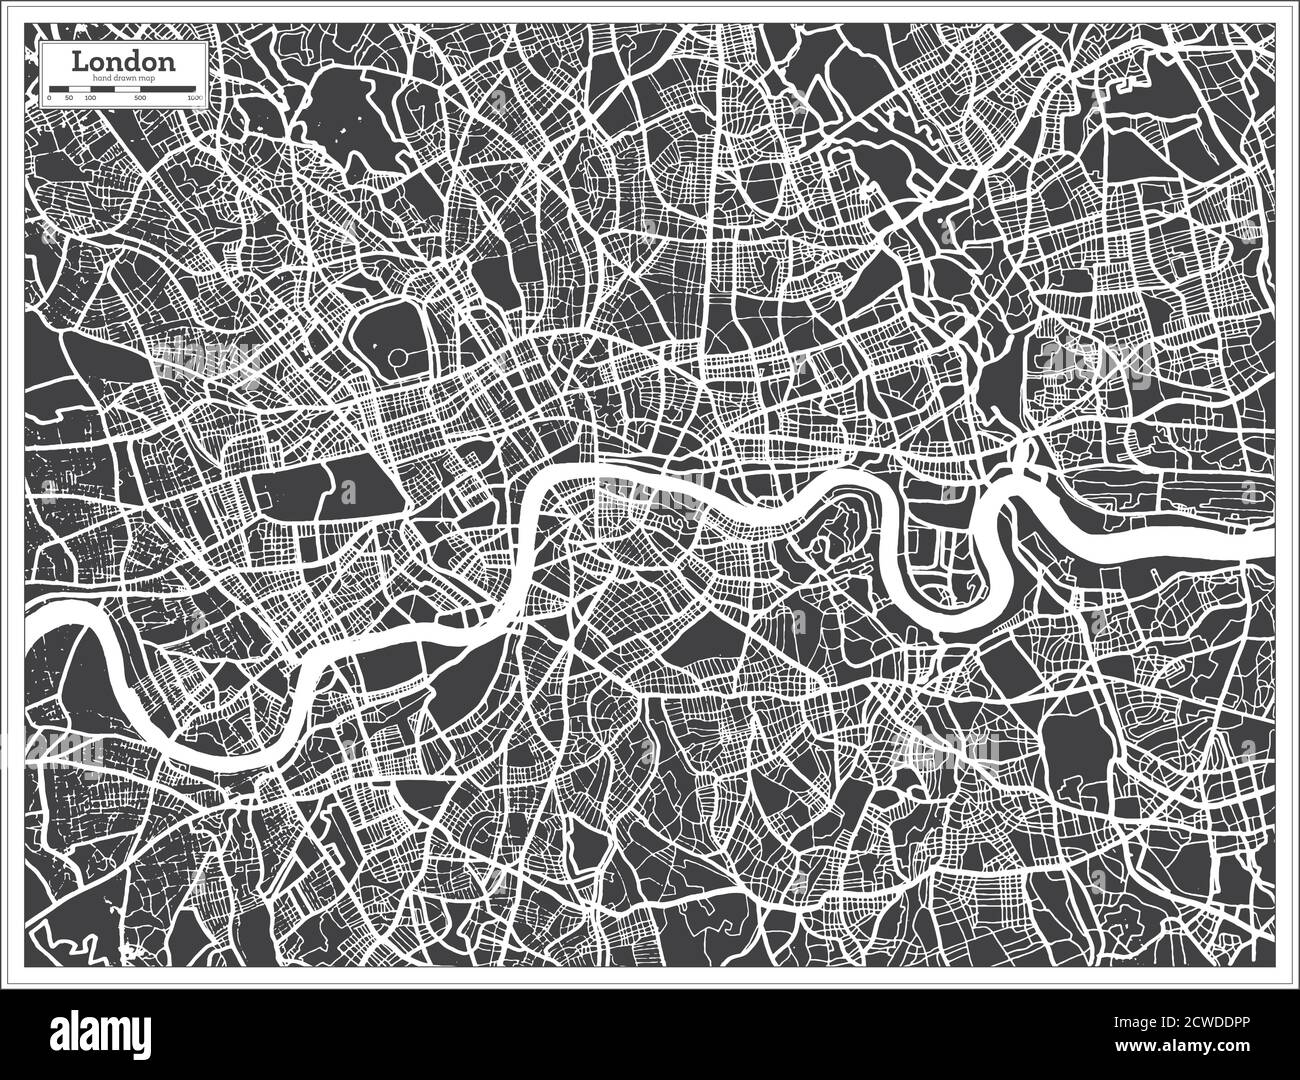 London UK City Map in Black and White Color in Retro Style. Outline Map. Vector Illustration. Stock Vector